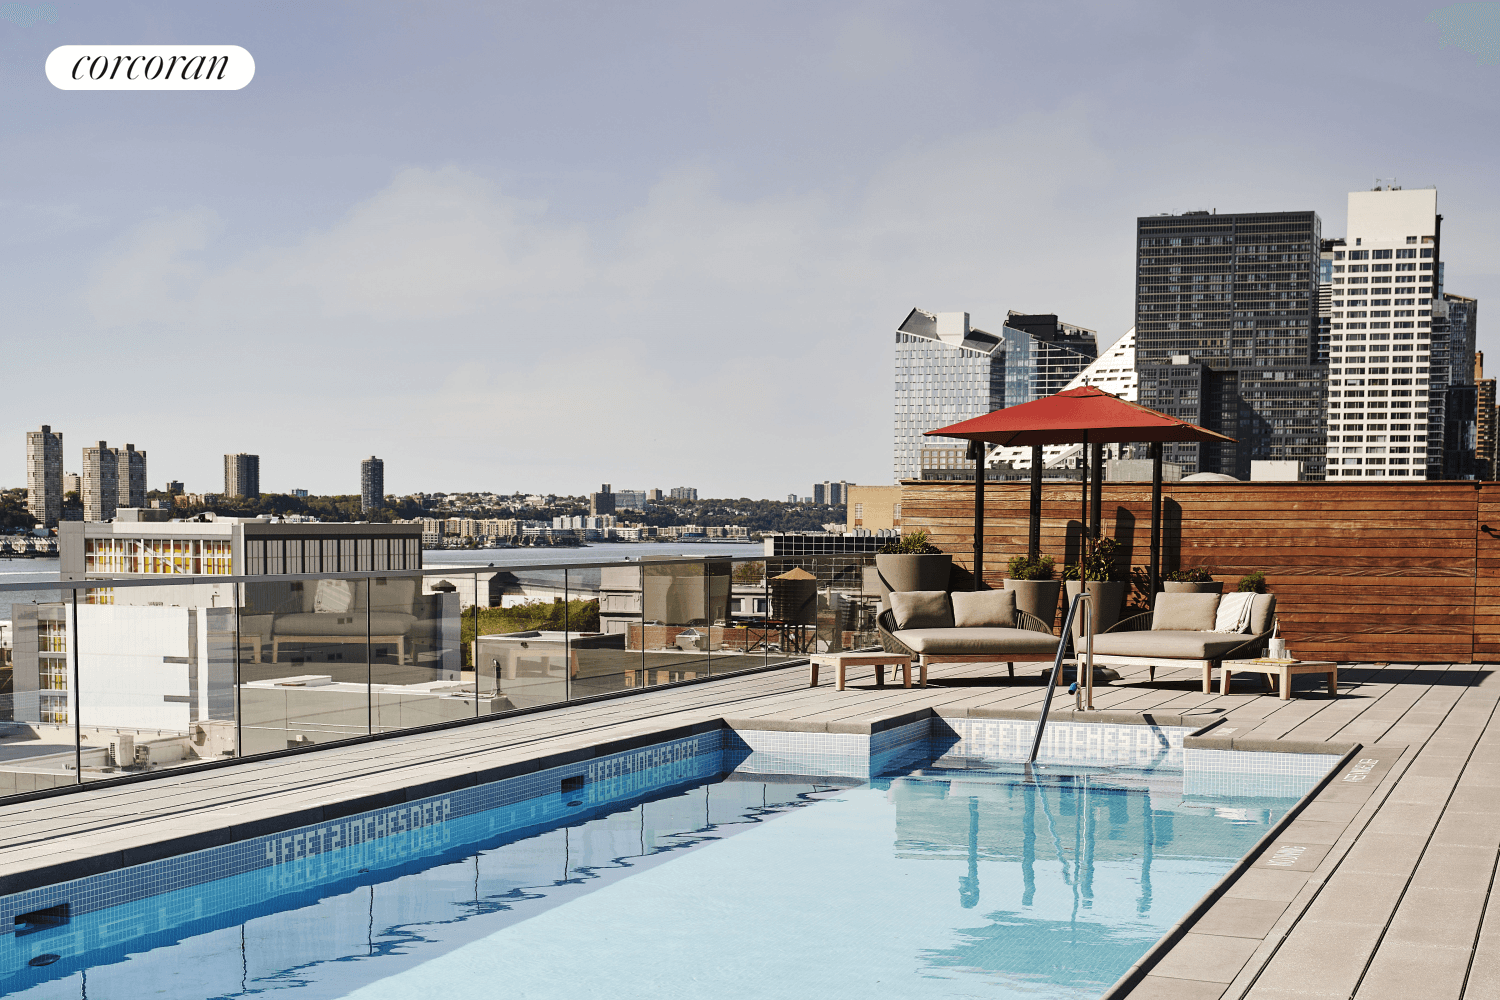 547 West 47th Street, 809The West Residence Club, Hell's Kitchen, New York, NY 10036547 West 47th Street offers lifestyle driven condominium residences with architecture and interiors by the innovative Dutch ...